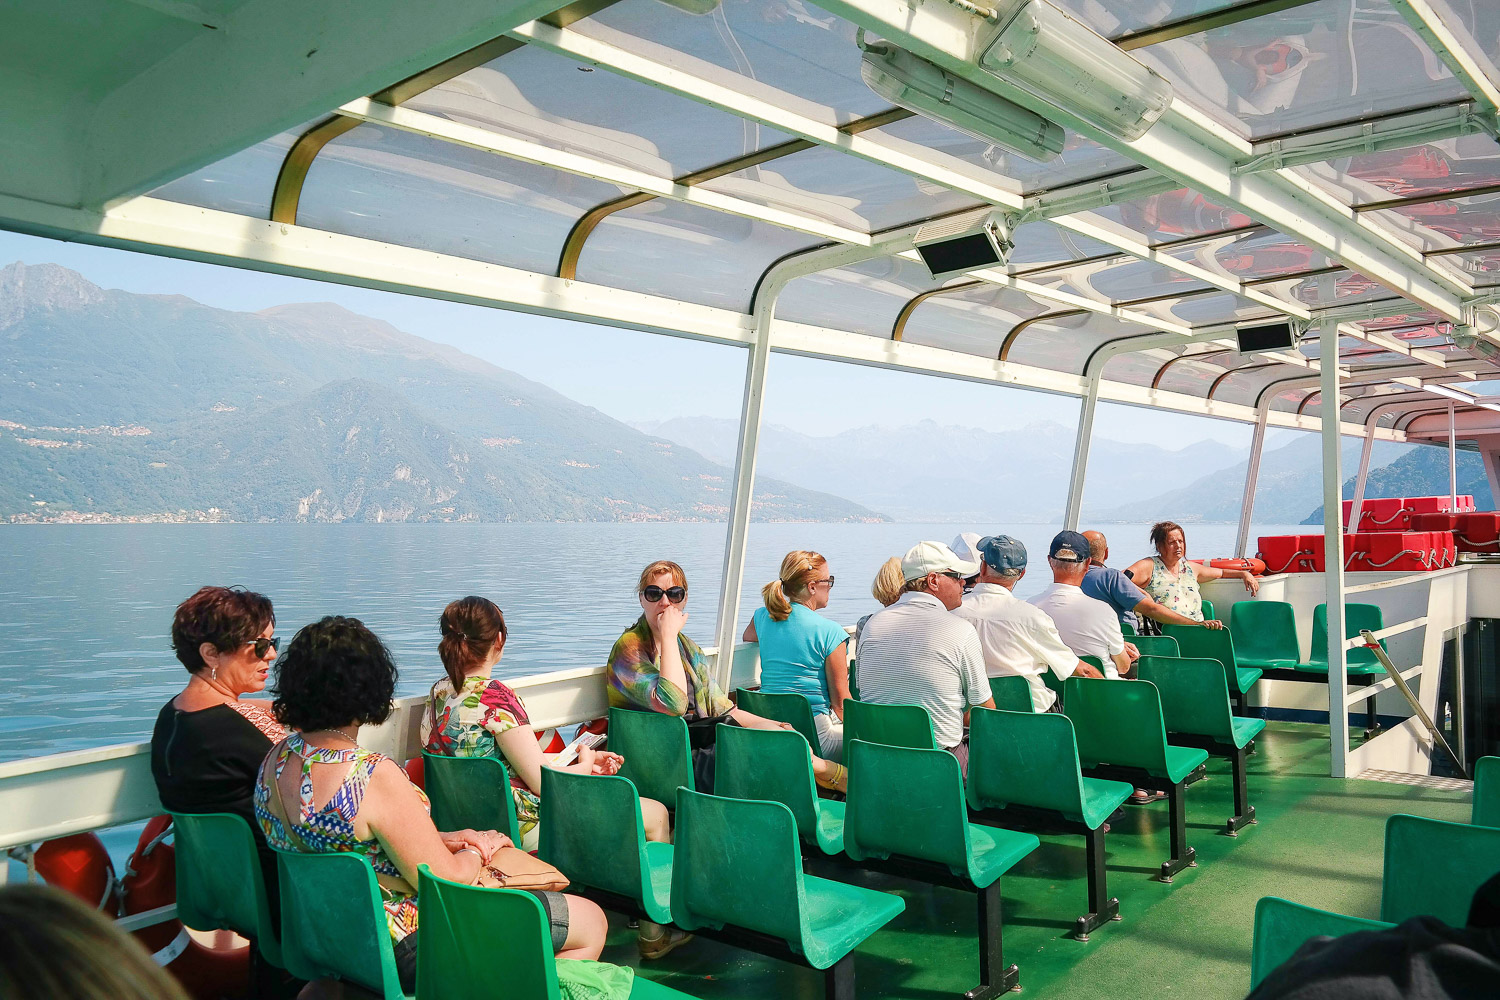 A picturesque ferry ride on Lake Como